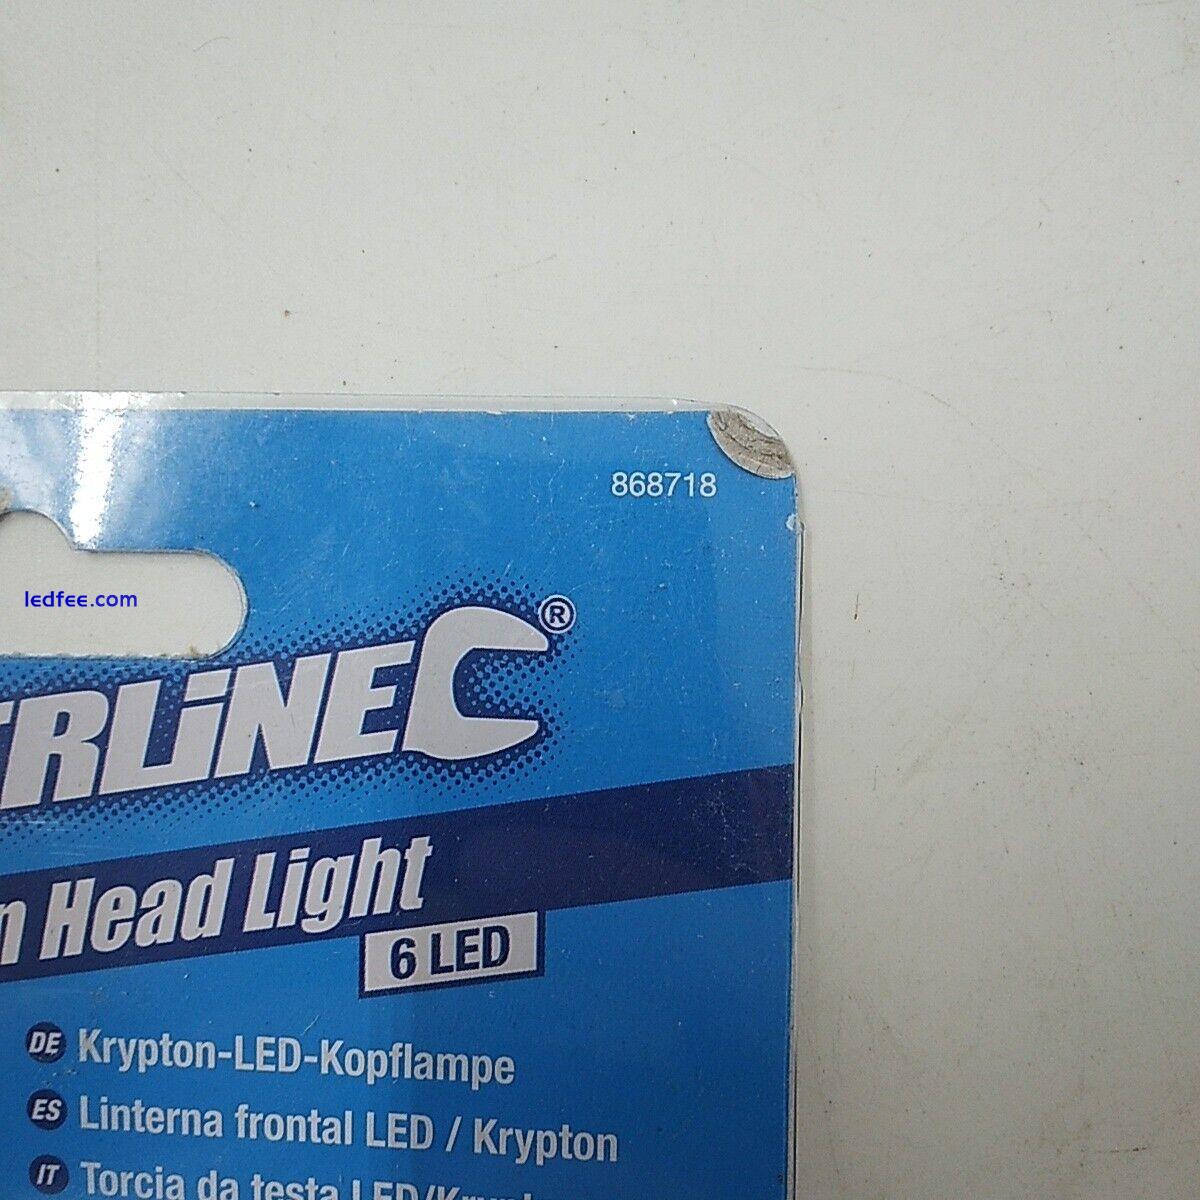 Silverline 6 LED Krypton Head Light Head Torches - New/Sealed Batteries Included 5 